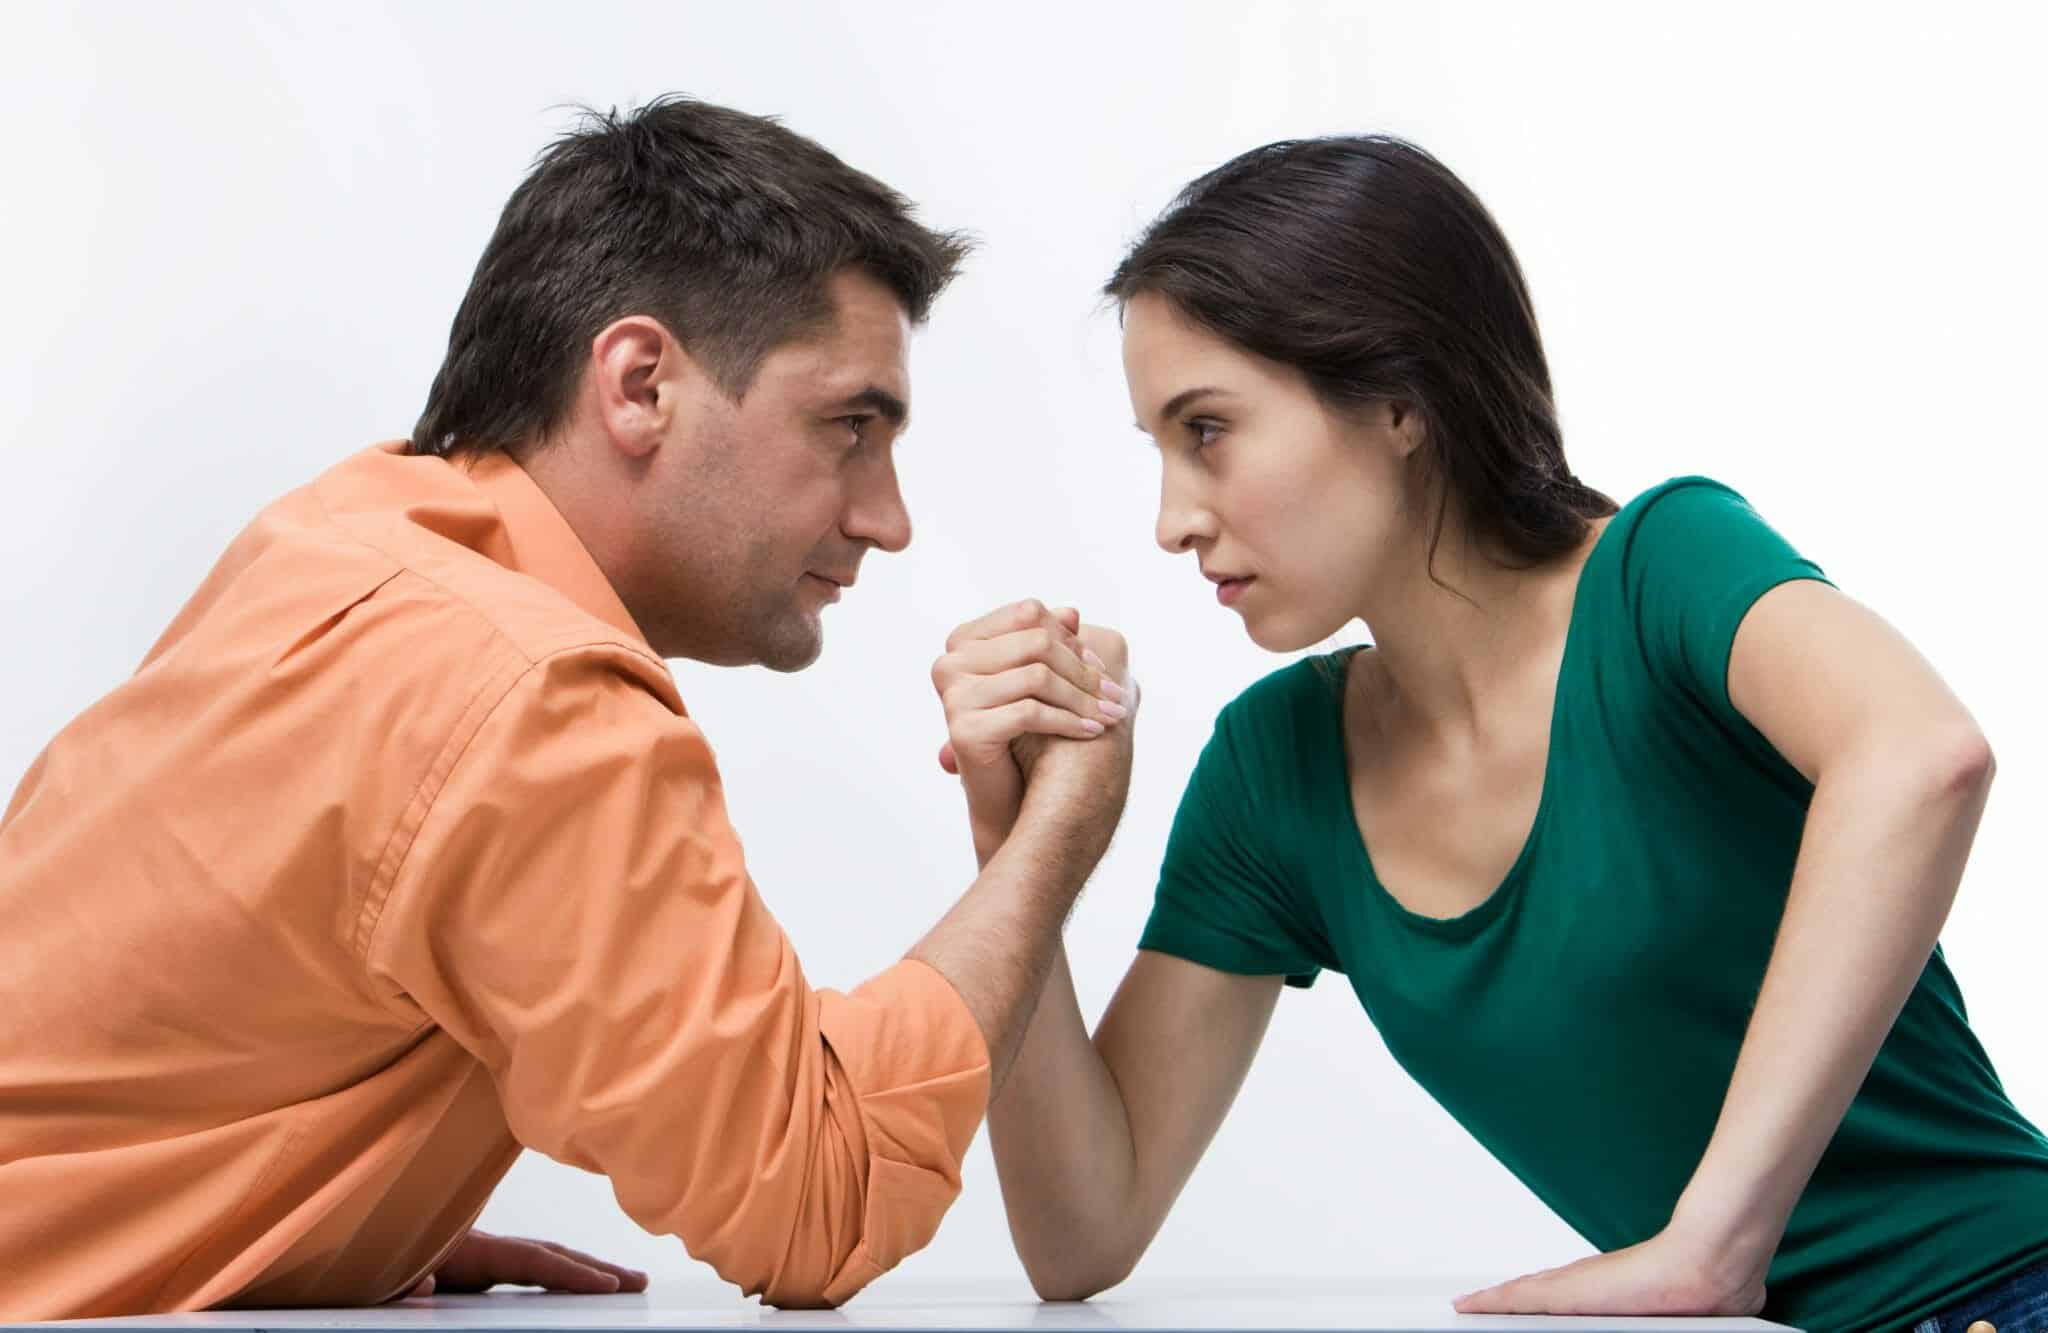 Man and woman arm wrestling - fighting with your spouse